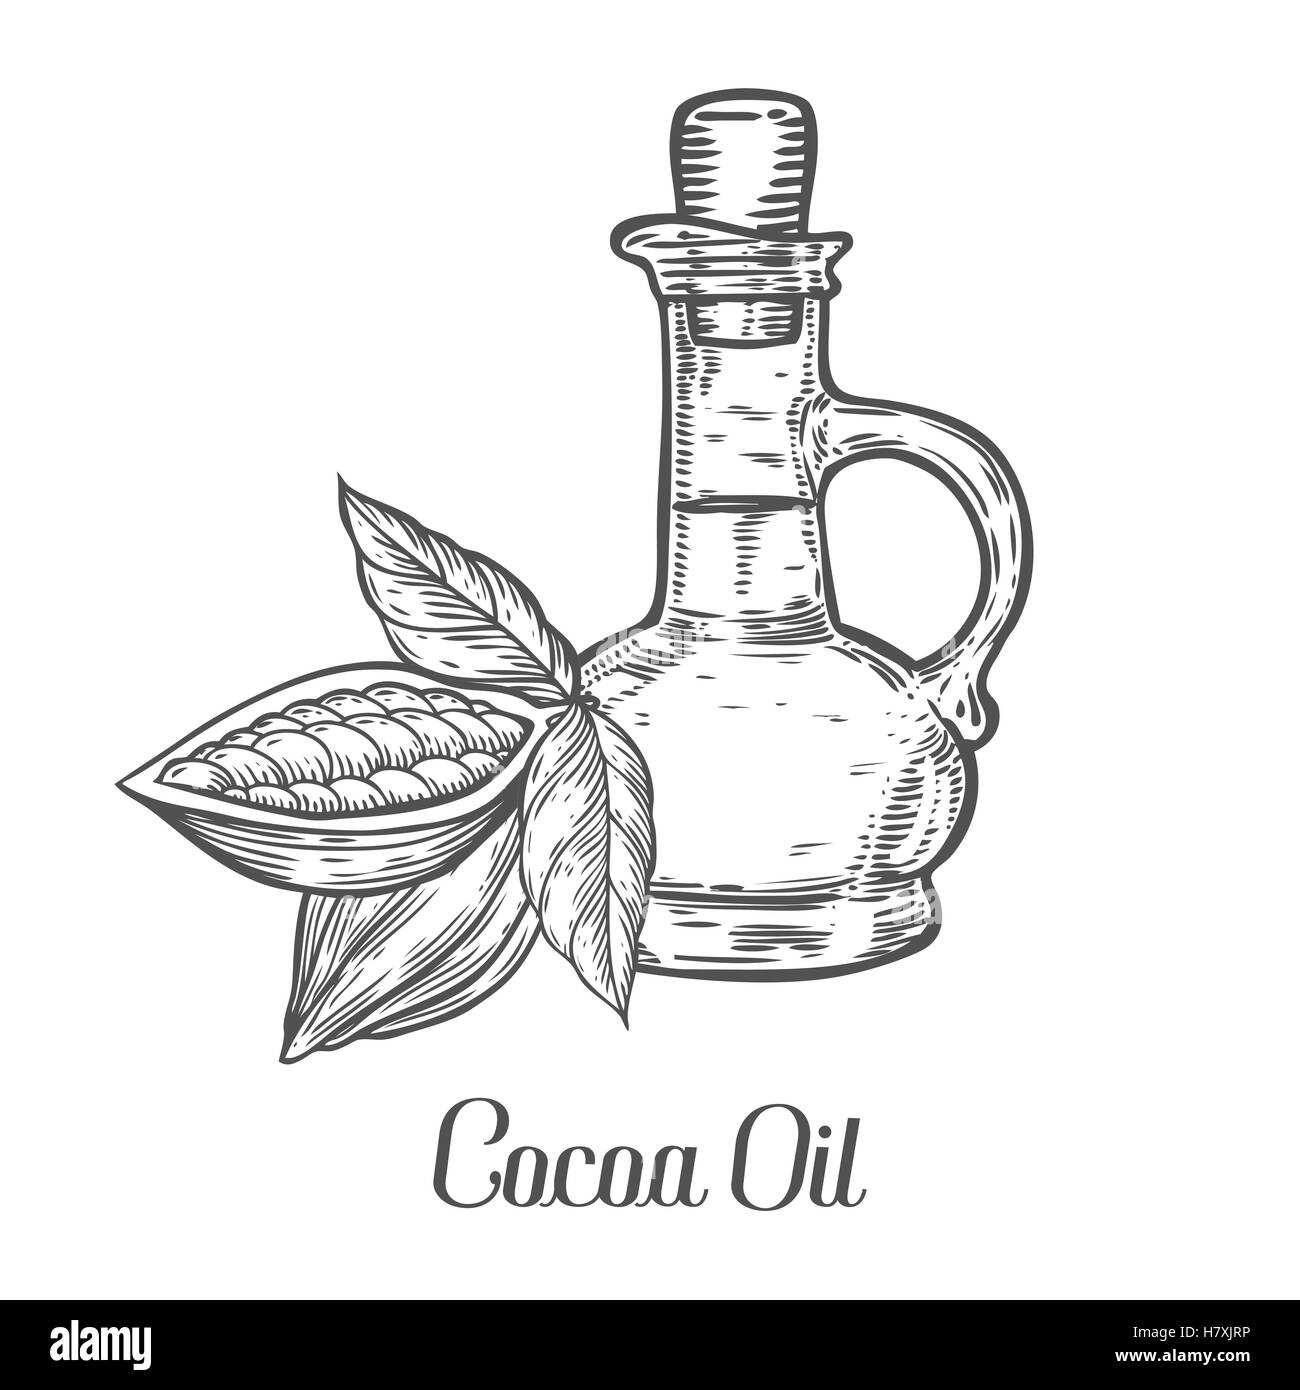 Cocoa cacao oil bottle seed vector. Isolated on white background. Cocoa food ingredient. Engraved hand drawn illustration in ret Stock Vector